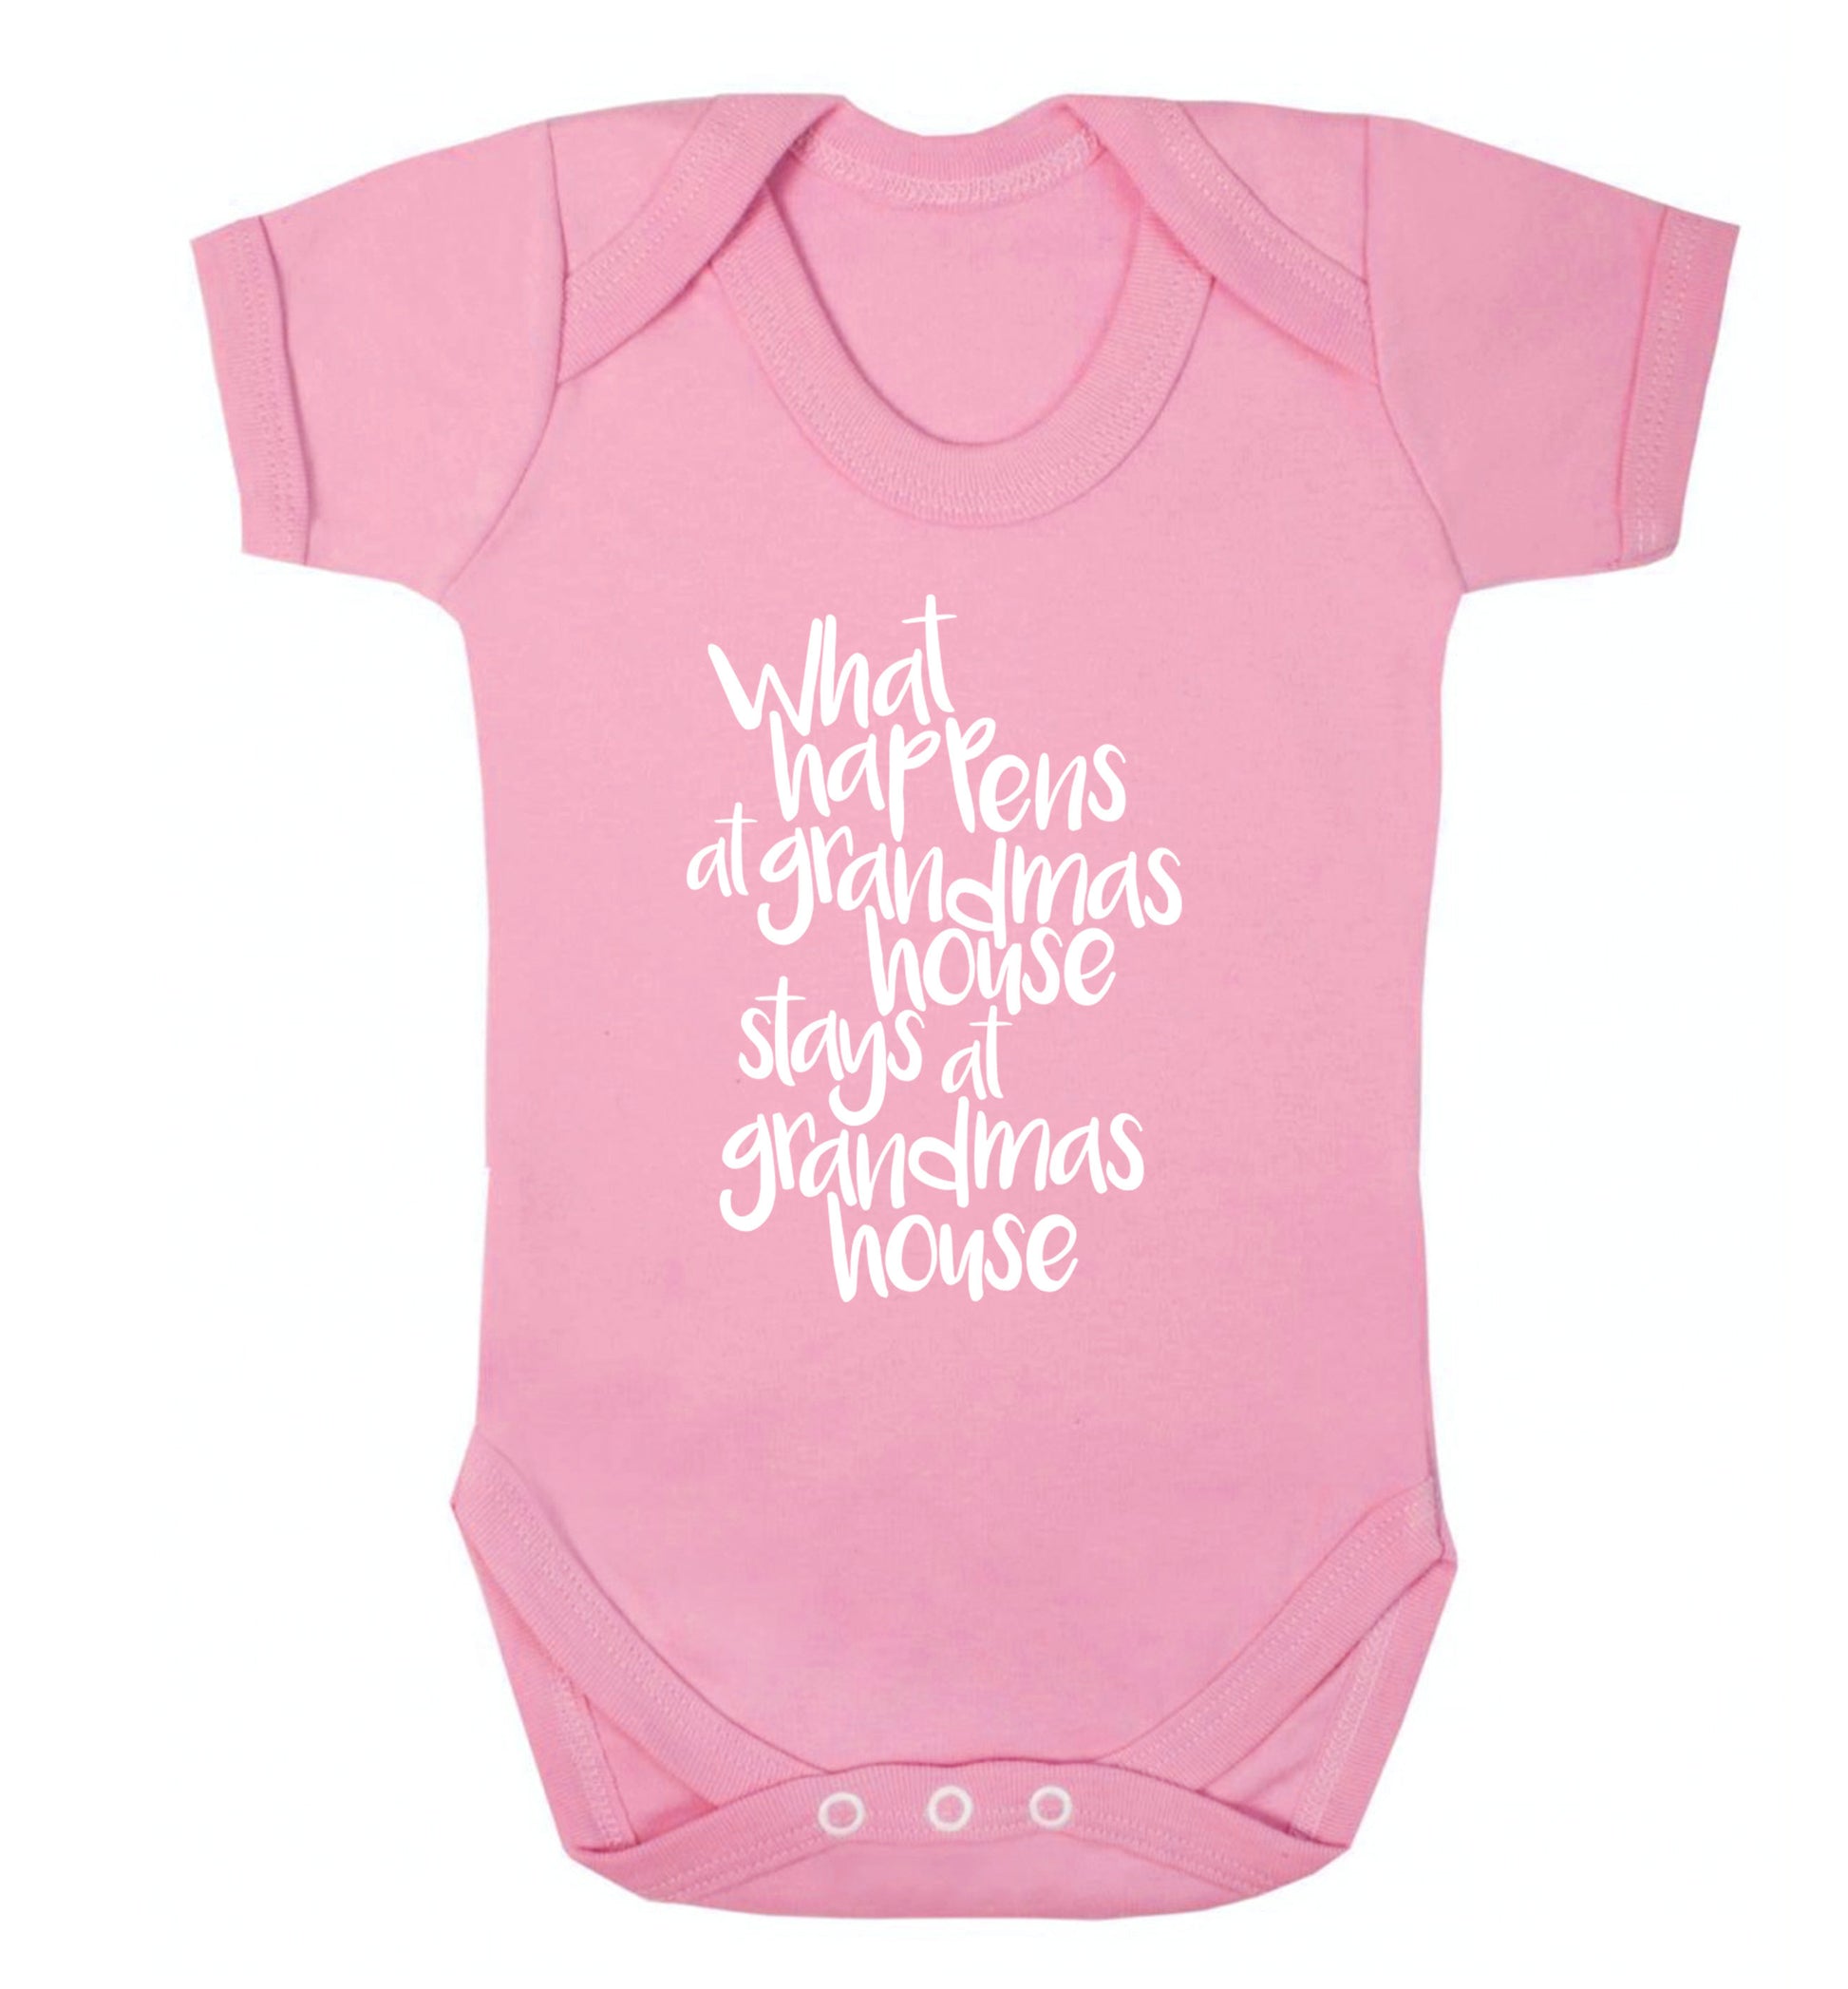 What happens at grandmas house stays at grandmas house Baby Vest pale pink 18-24 months